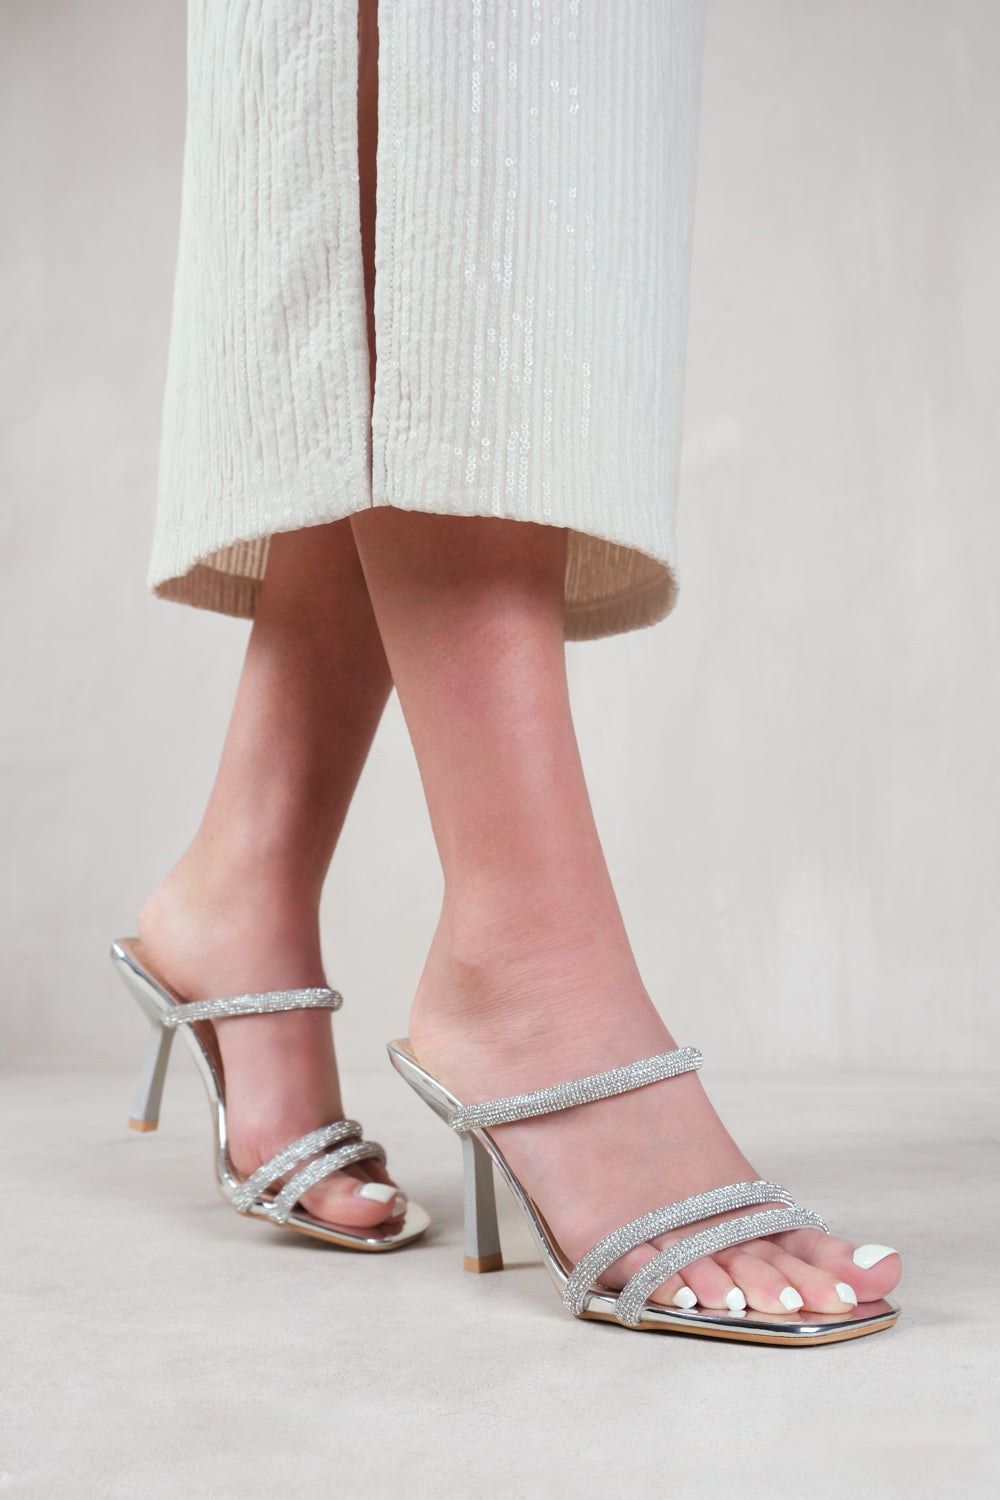 MOONSTONE STRAPPY SLIP ON LOW HEELS WITH DIAMANTE DETAIL IN SILVER METALLIC